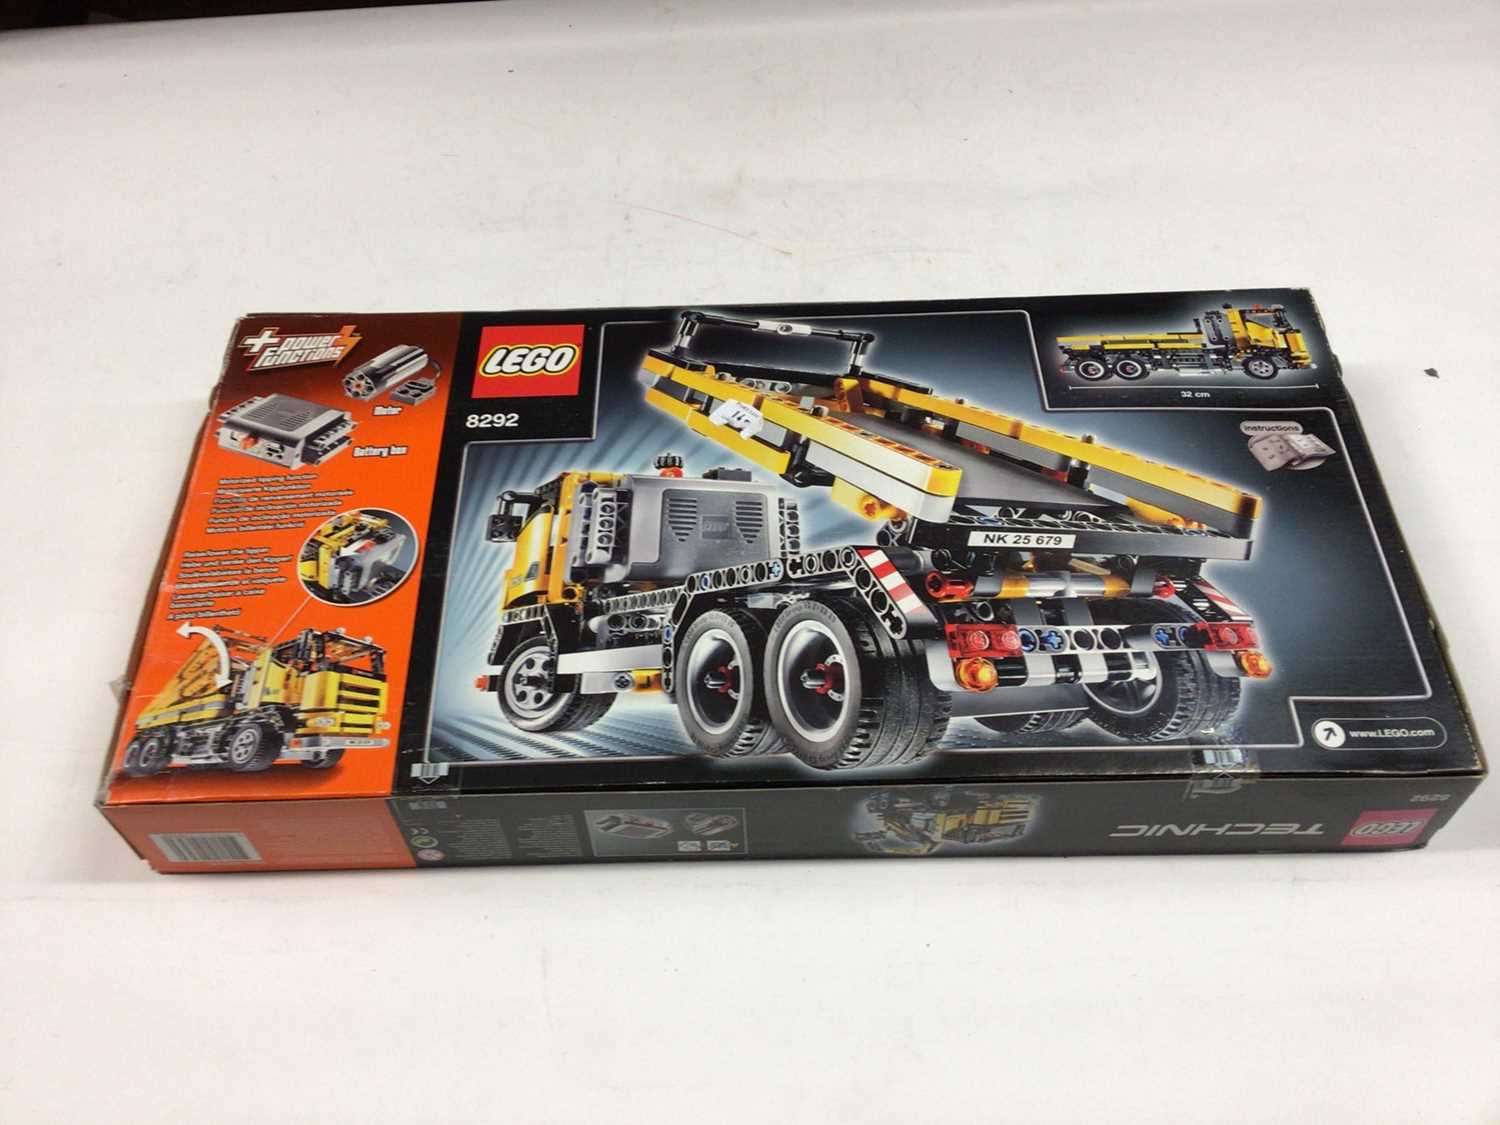 Lego Technic 8295 Telescopic Loader, 42006 Excavator 2 in 1, 8446 Monster Crane Truck, all with inst - Image 8 of 8